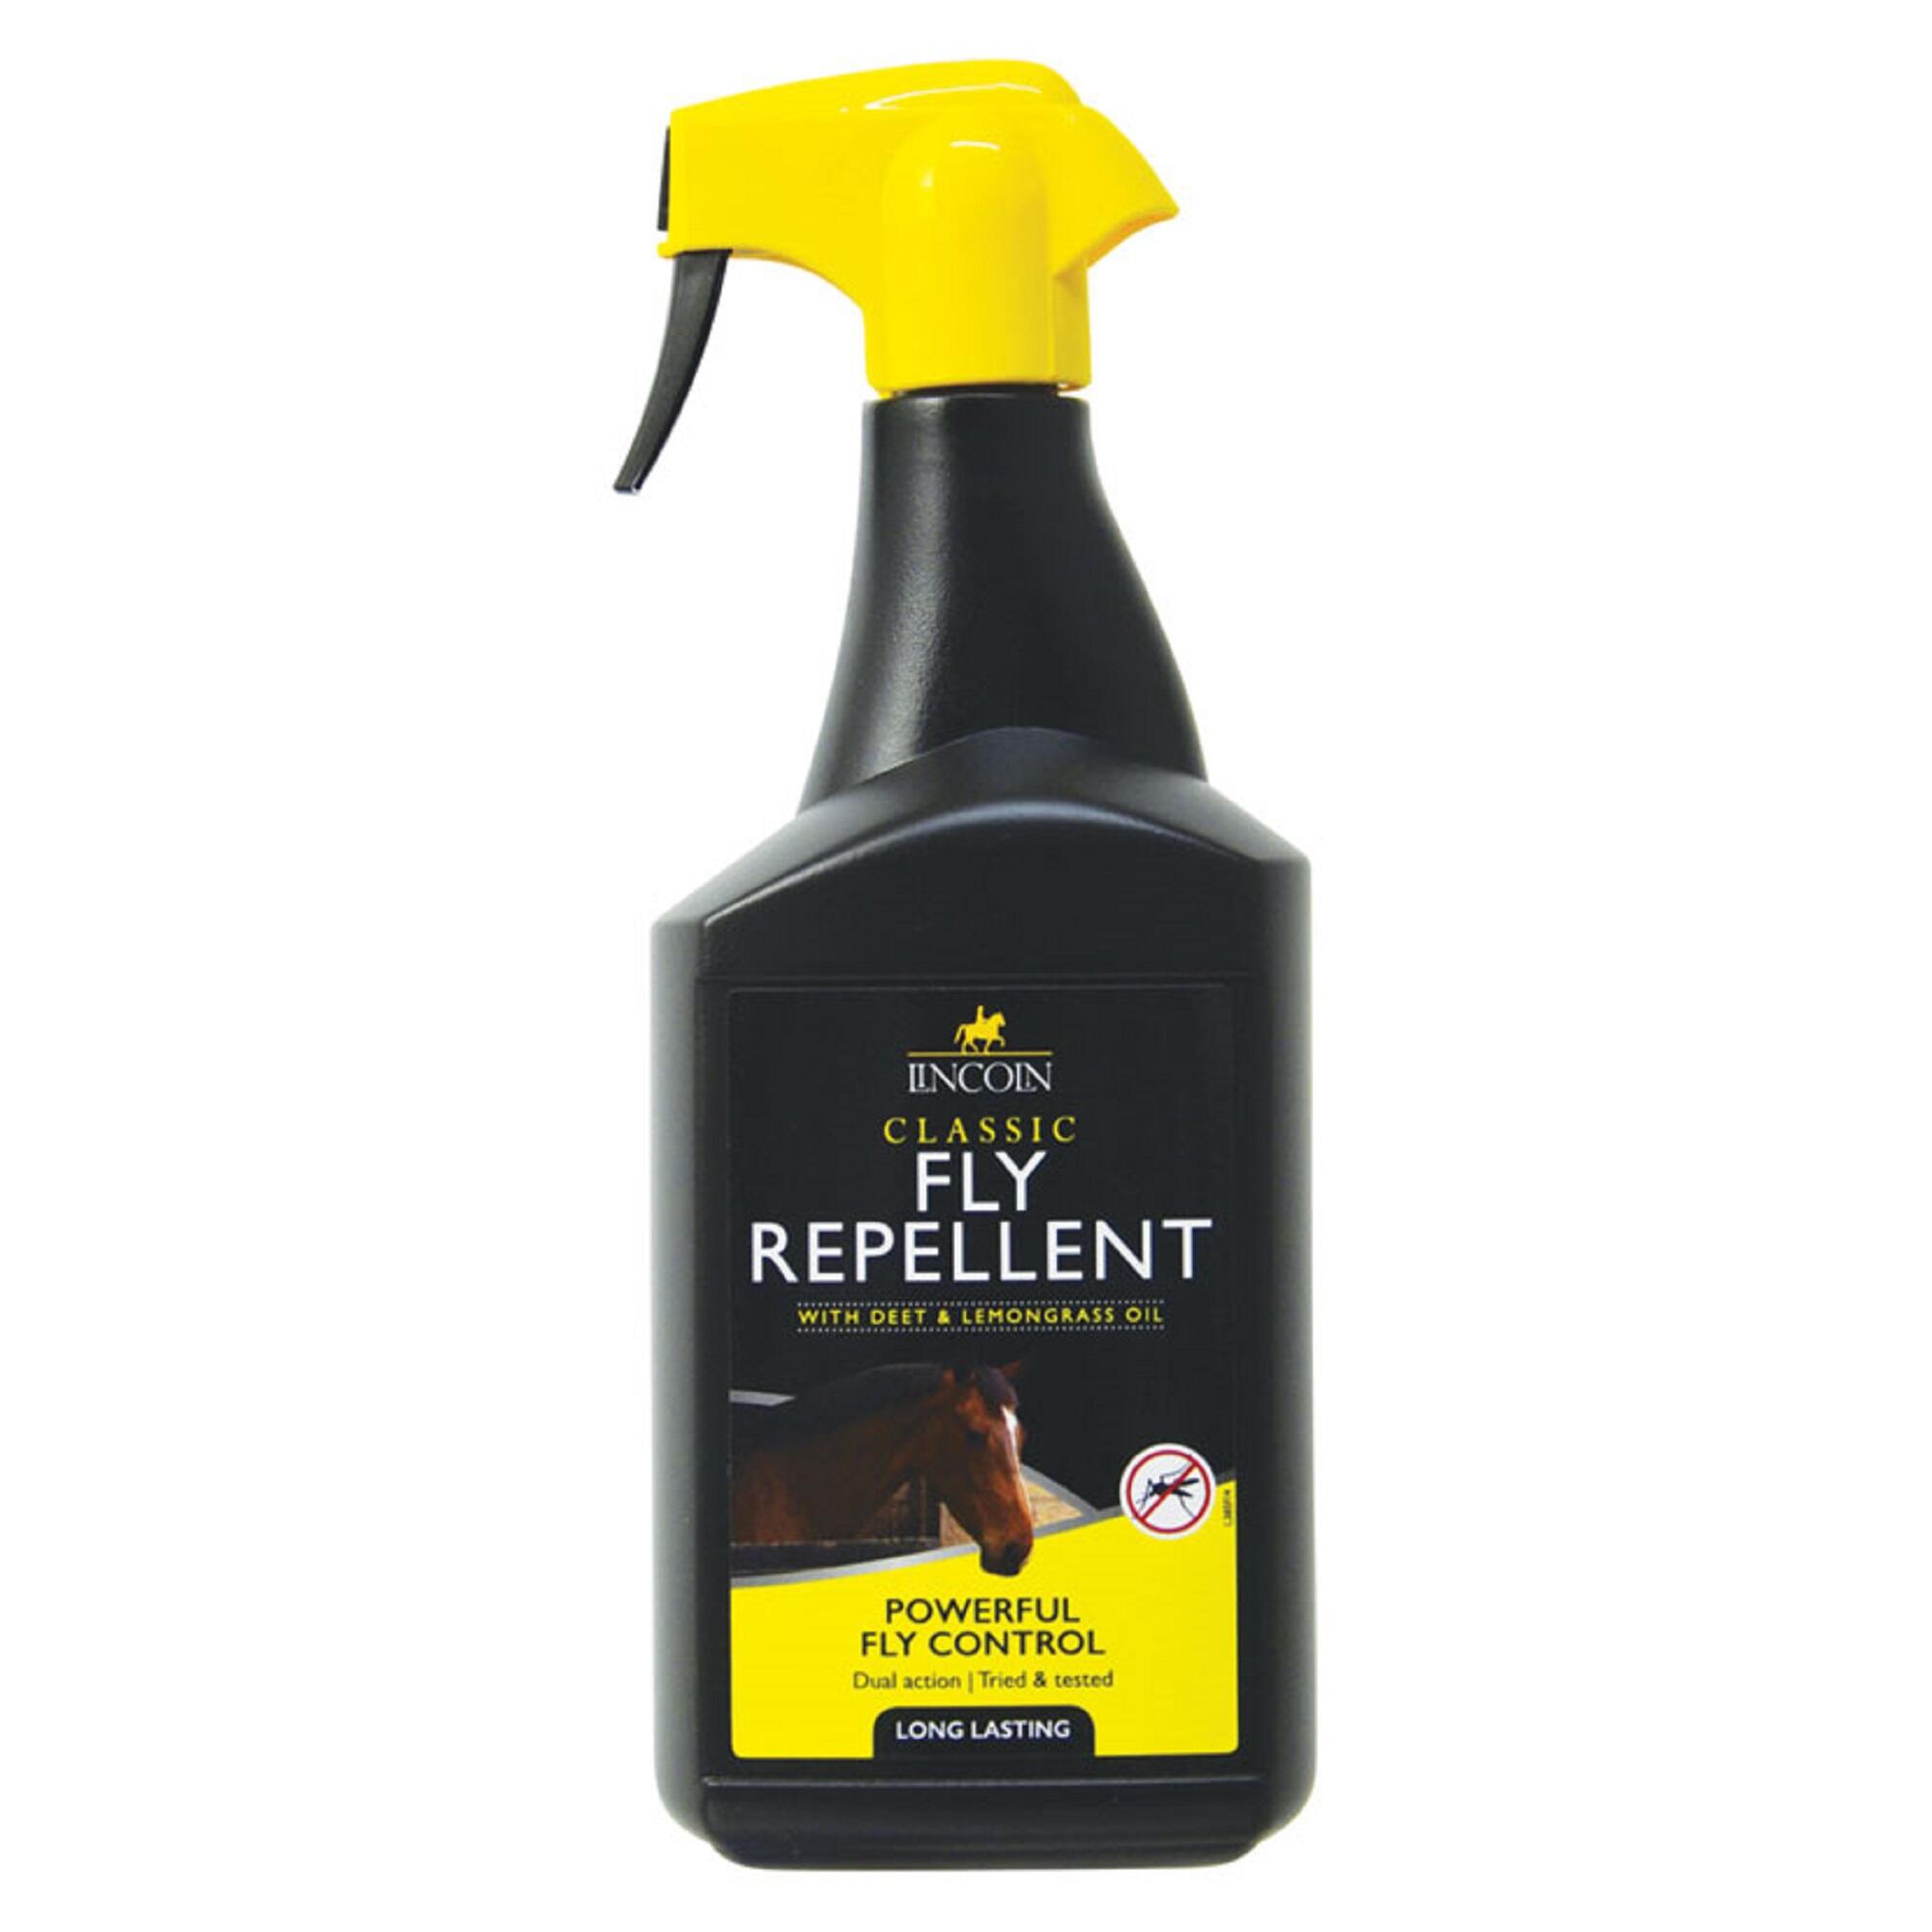 LINCOLD CLASSIC FLY REPELLANT 1/1